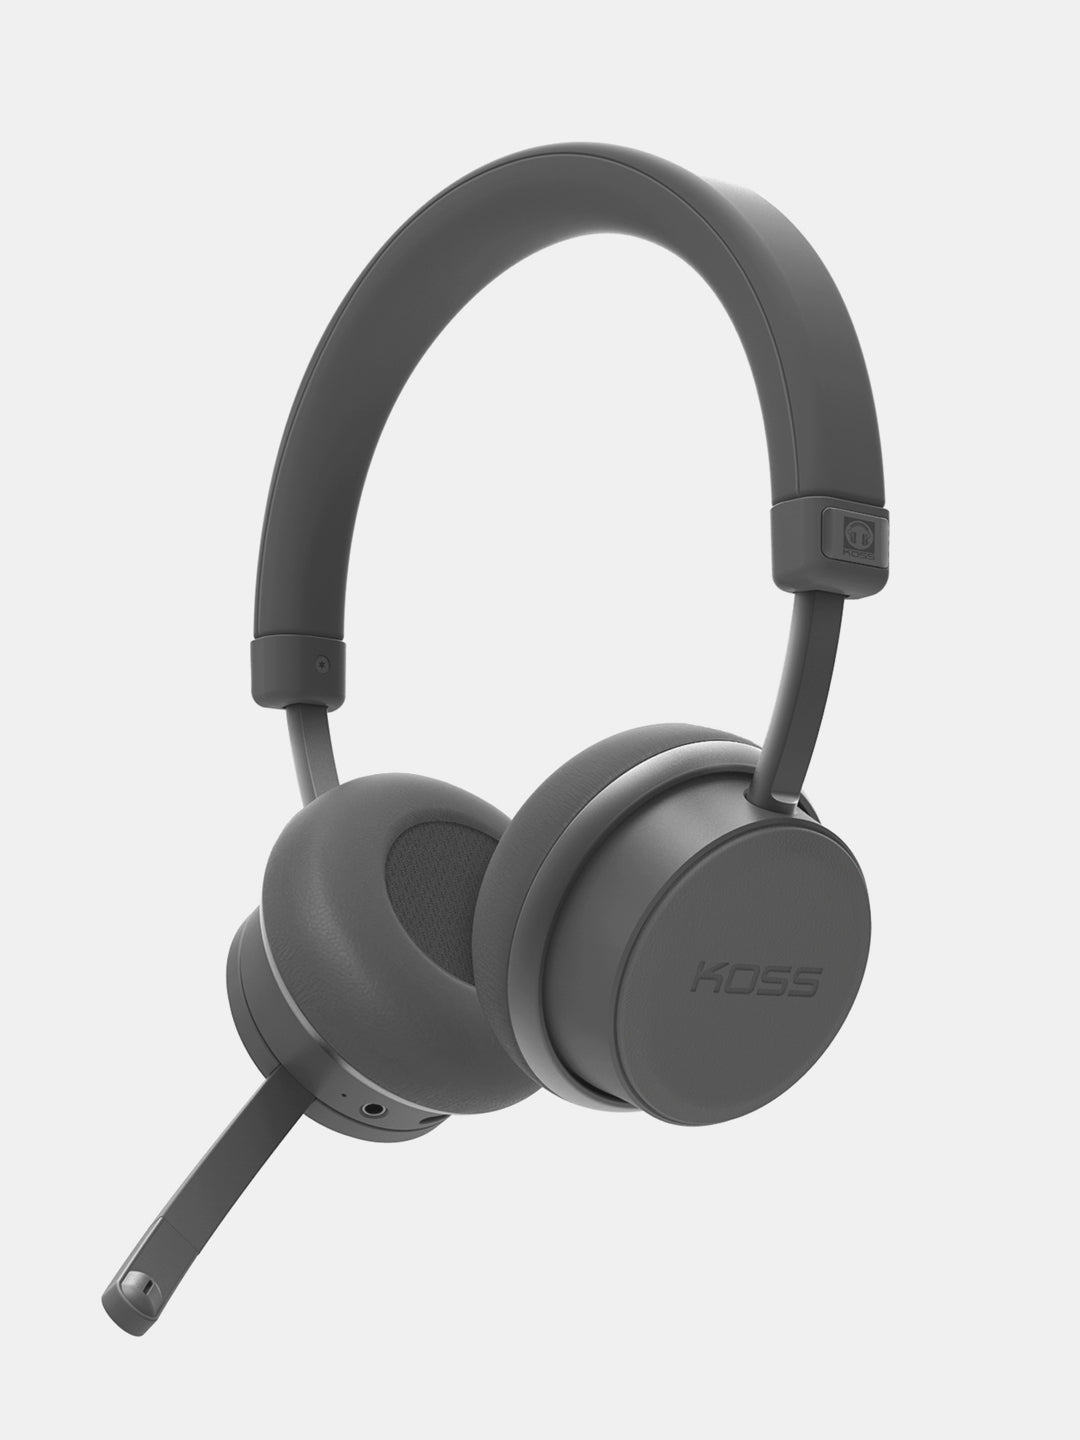 Communication Headsets - Koss Stereophones